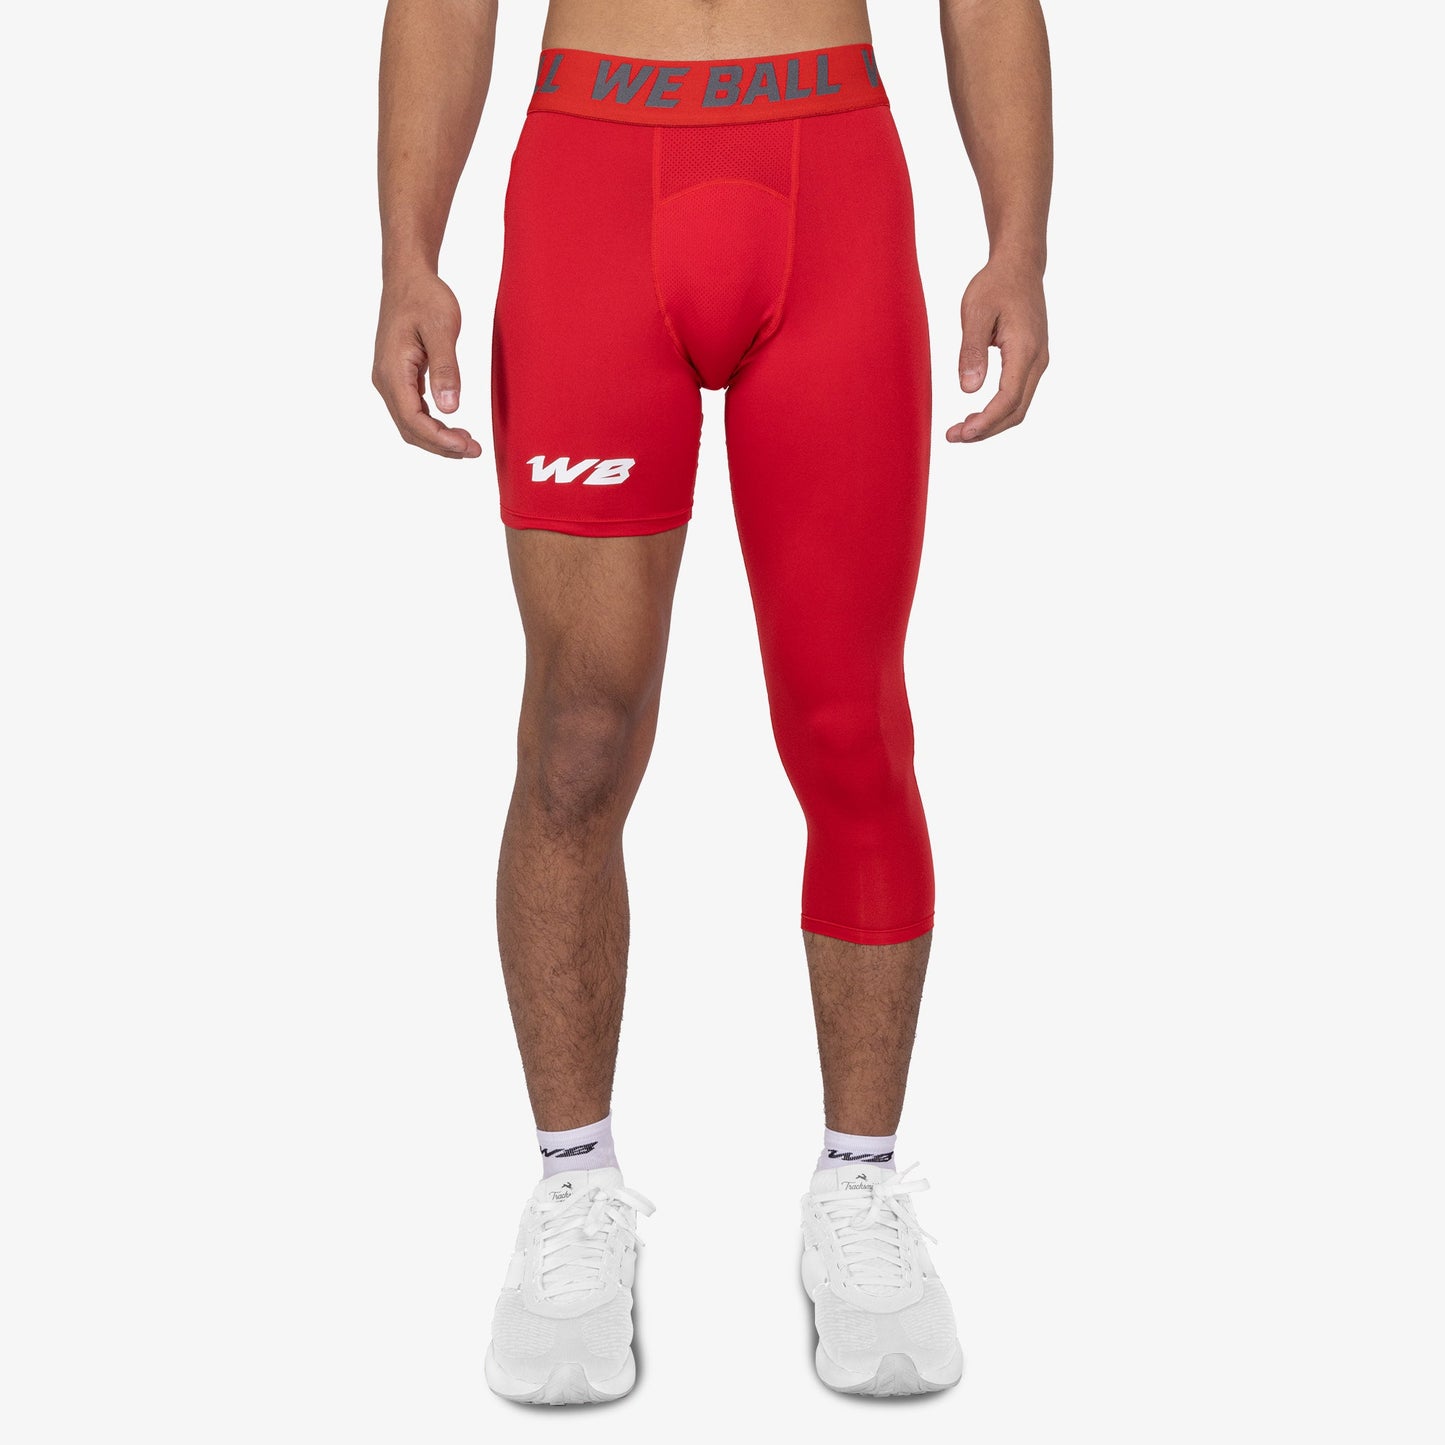 ISO LEG WBTECH™ 3/4 TIGHTS (RED) - We Ball Sports